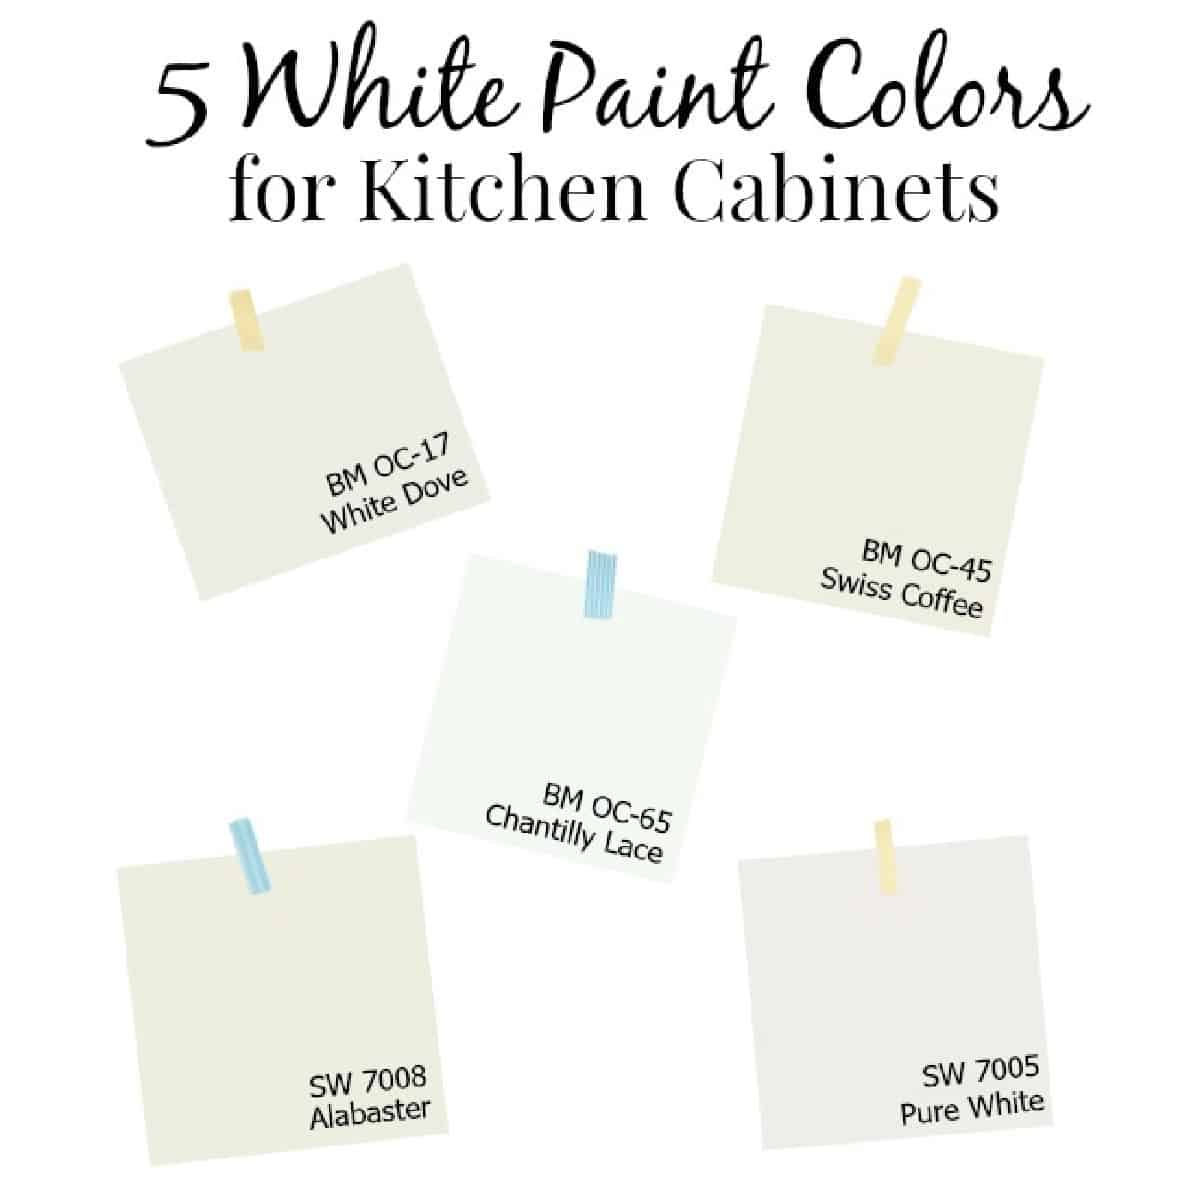 White Paint Color For Your Kitchen Cabinets, What Is A Good White Paint Color For Kitchen Cabinets